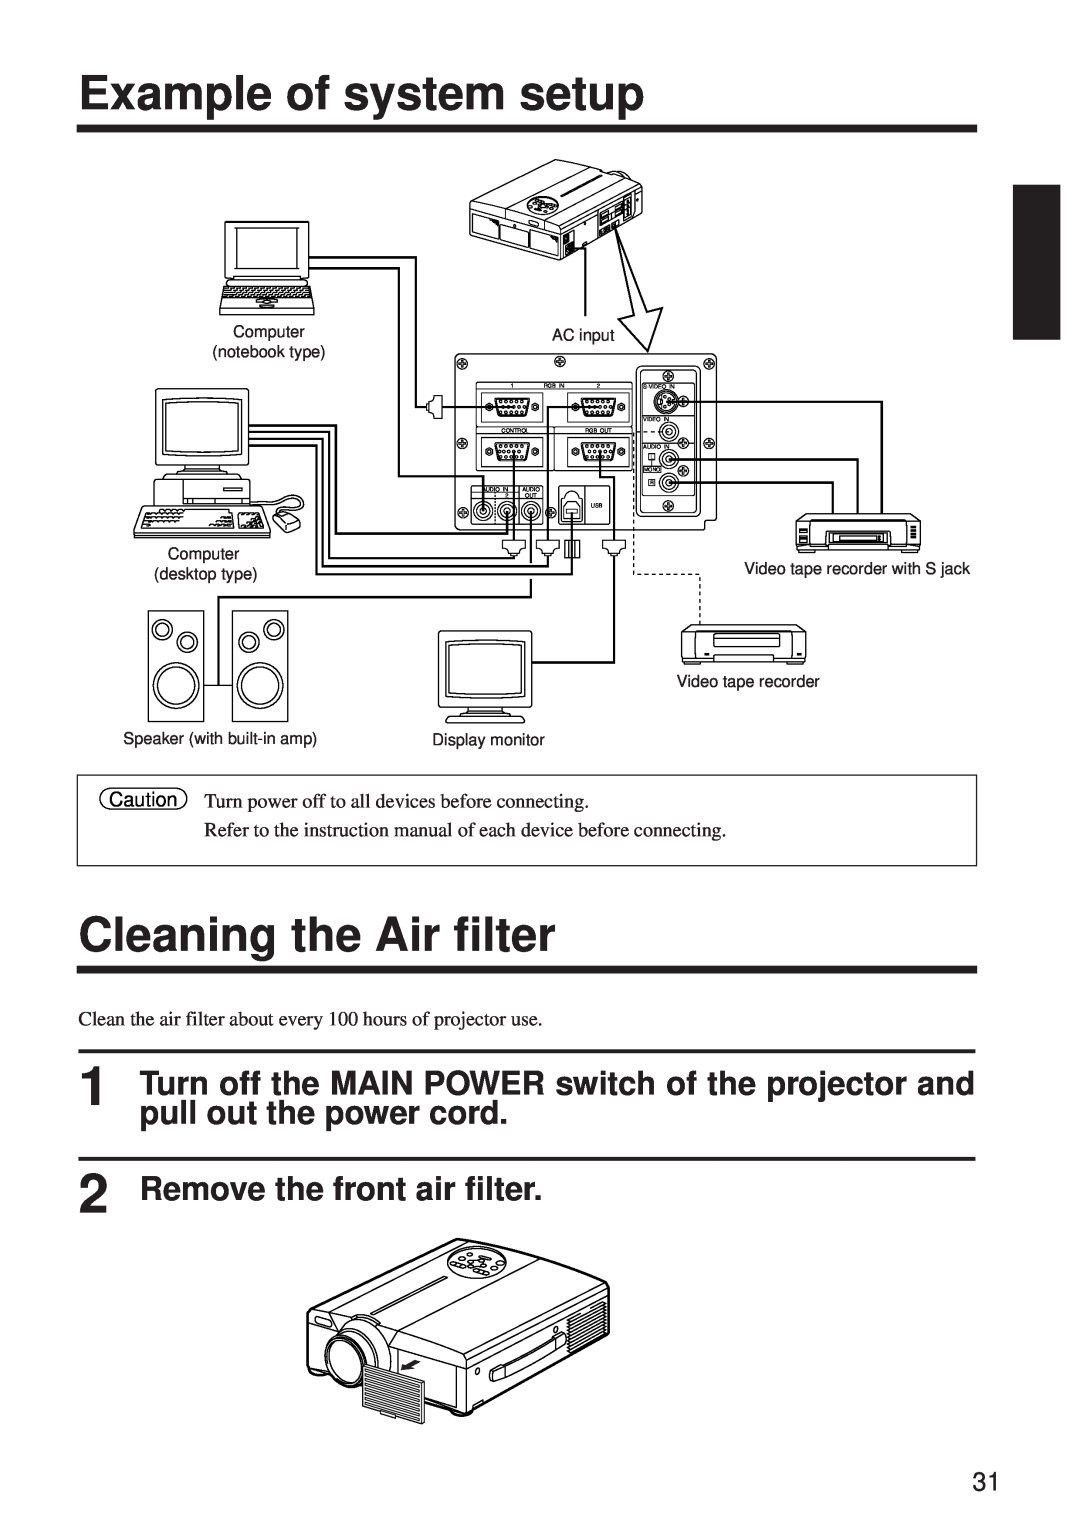 BOXLIGHT MP-650i Example of system setup, Cleaning the Air filter, pull out the power cord, Remove the front air filter 